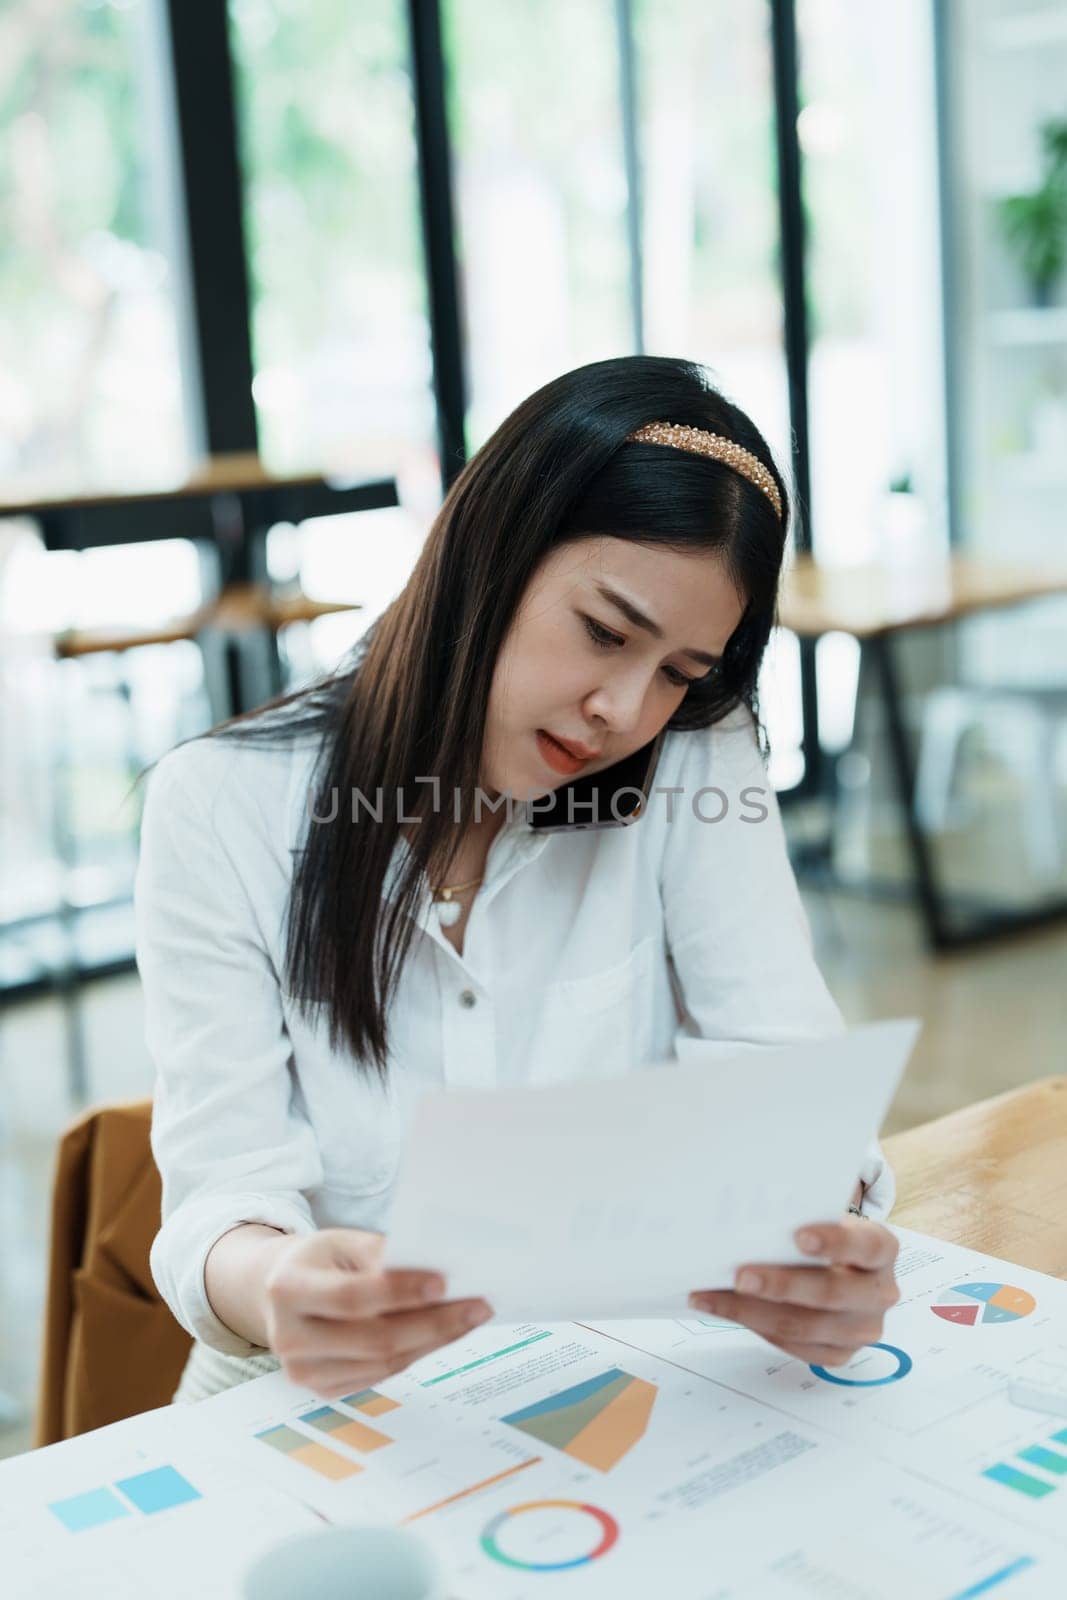 A portrait of a beautiful Asian female employee showing a stressed face while using the phone and financial documents on her desk.